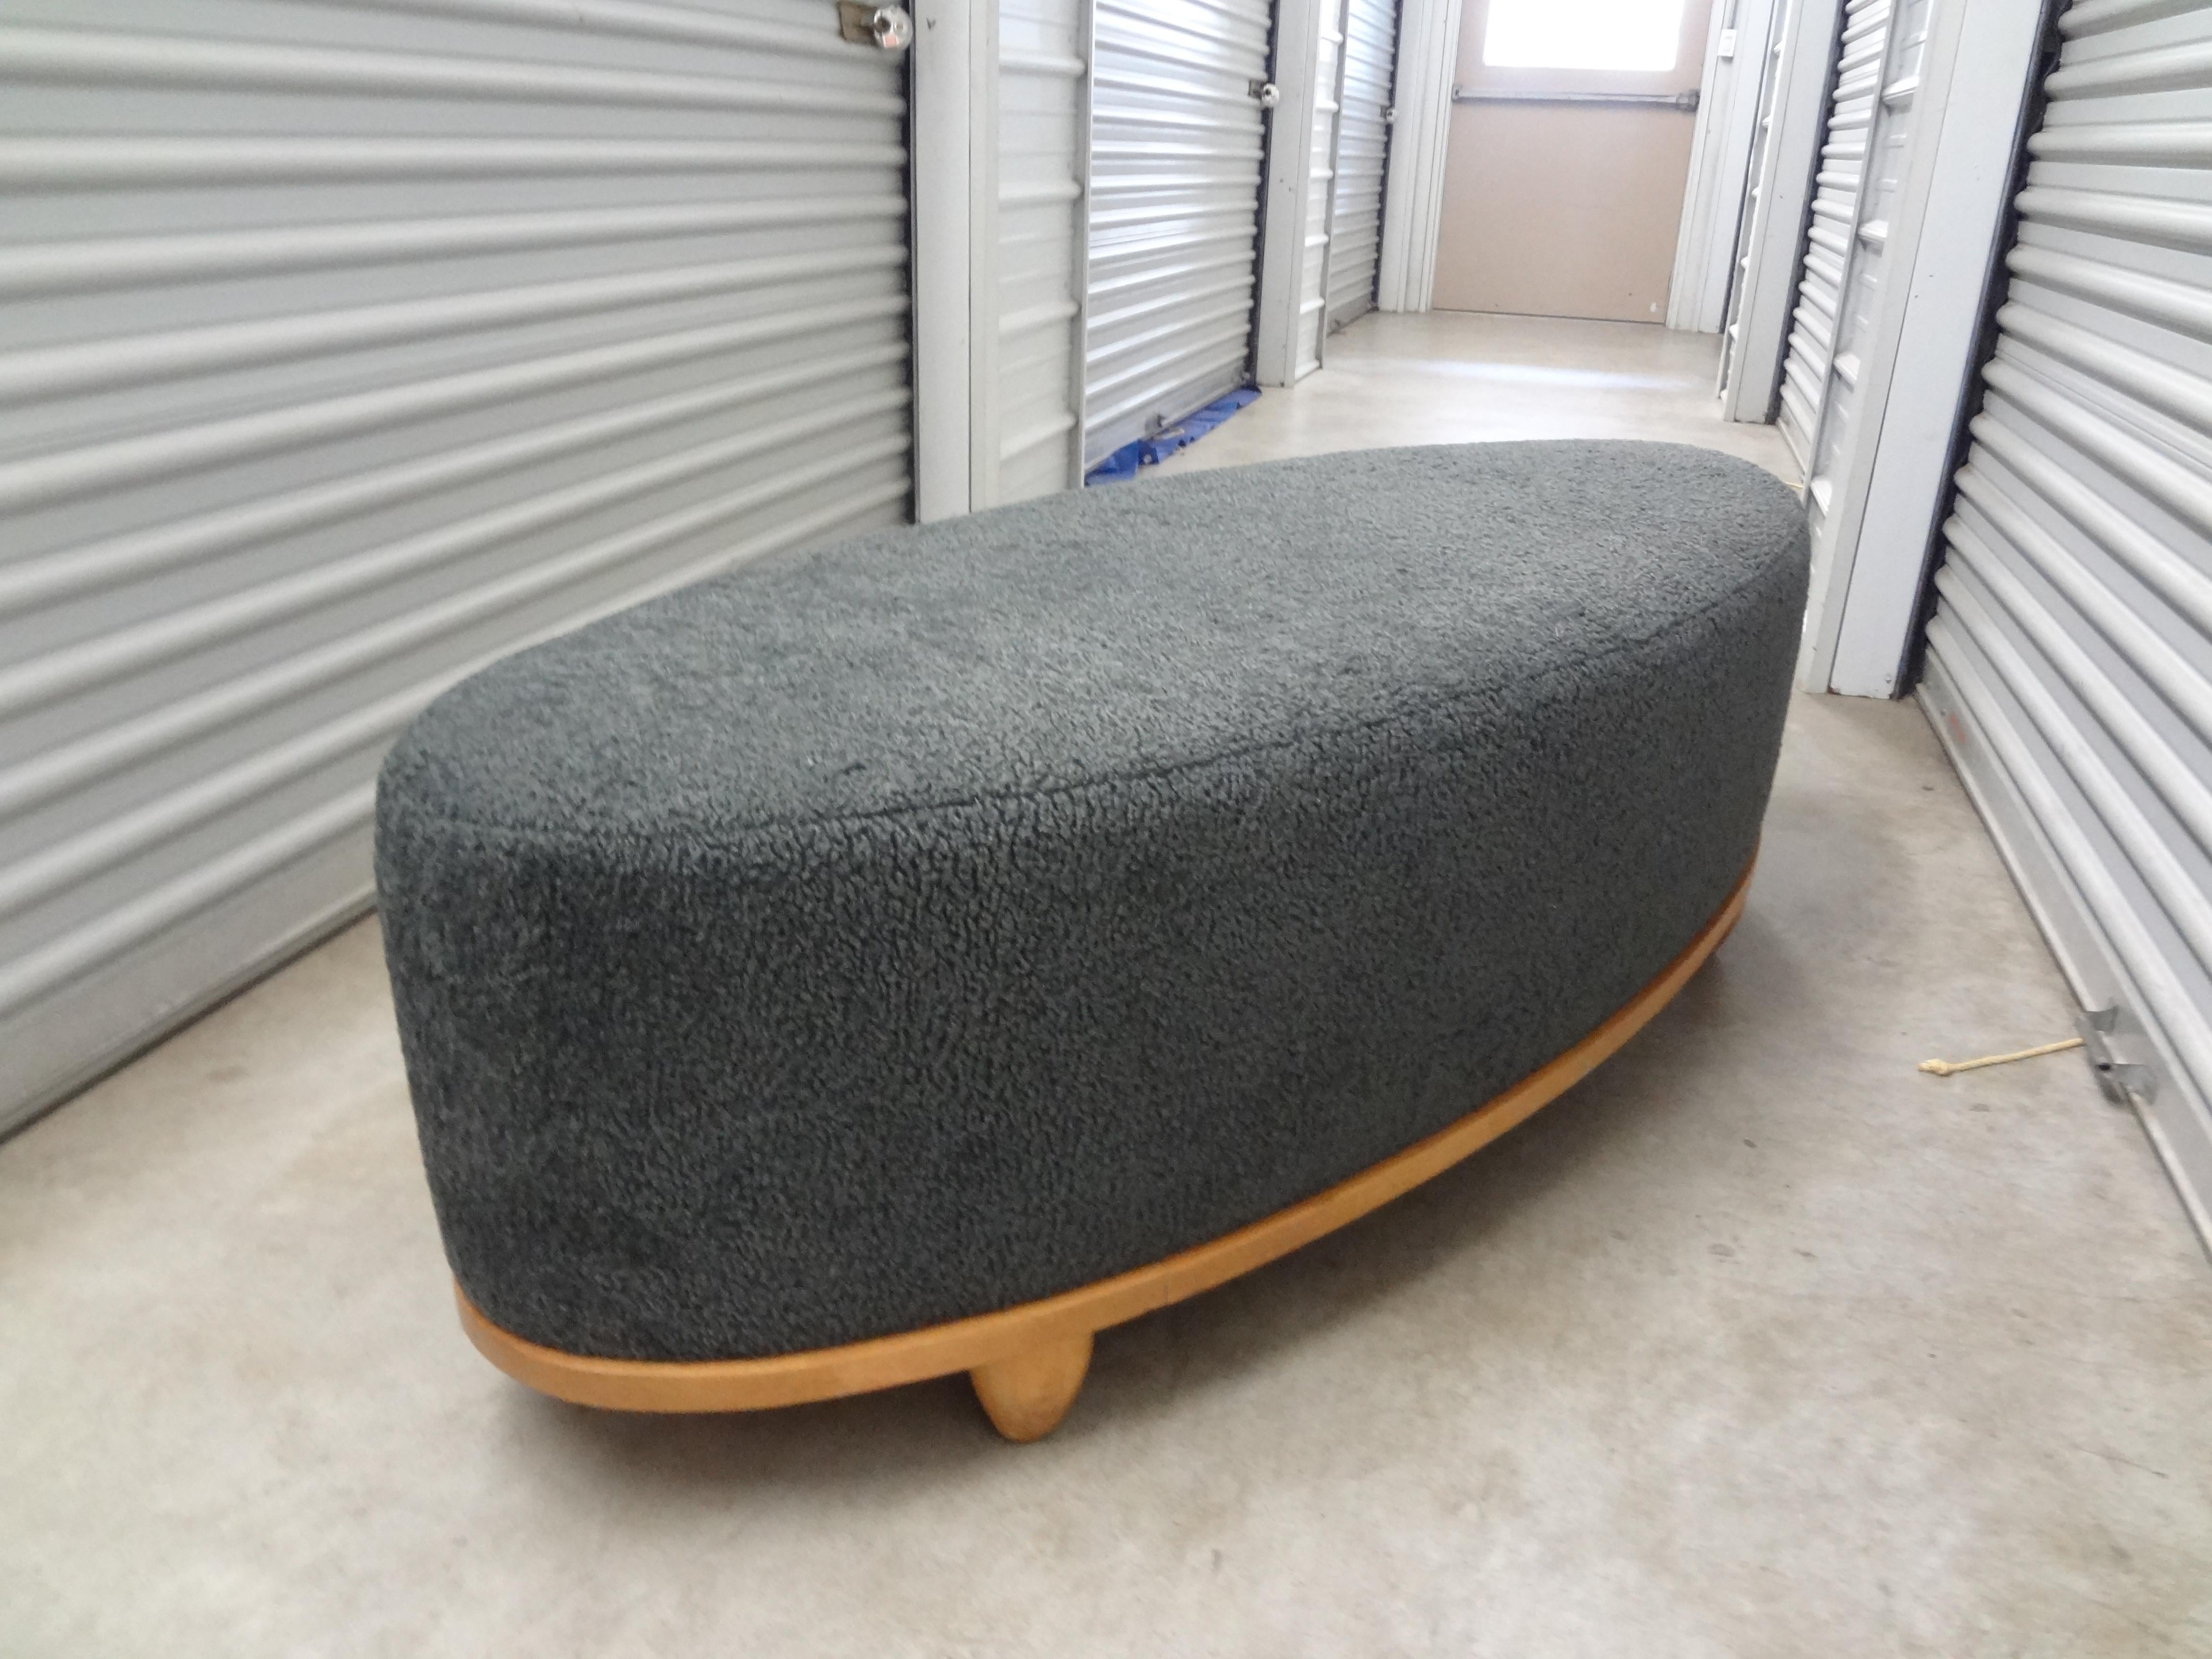 Hollywood Regency Large Mid-Century Oval Bench Upholstered in Grey Shearling